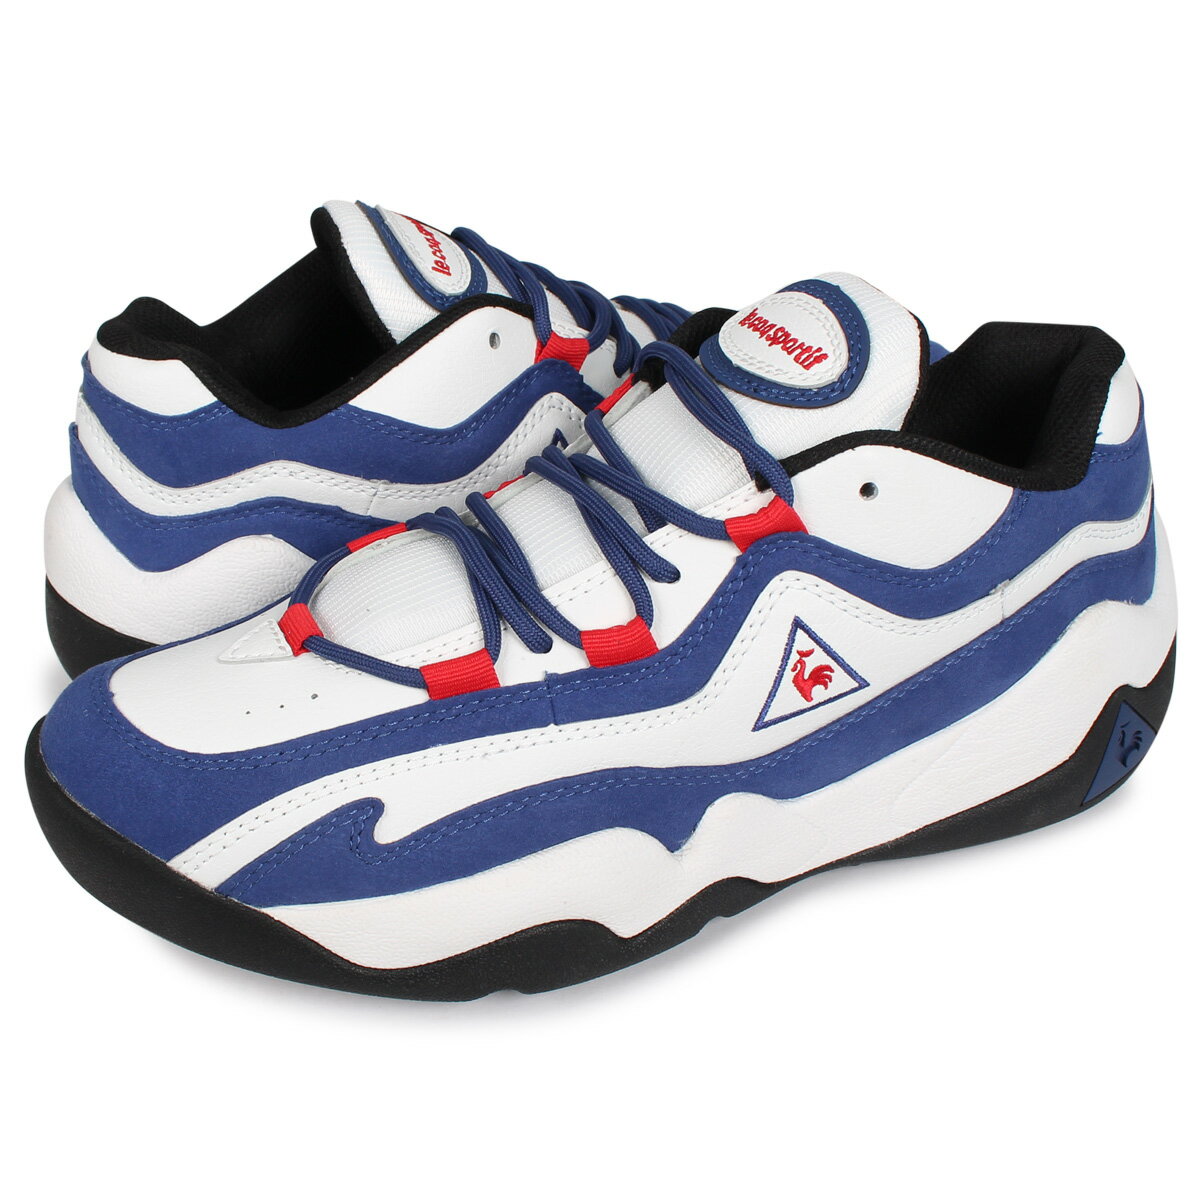 le coq sportif LCS TR 2 륳å ݥƥ ˡ  ۥ磻  QL2PJC25NW